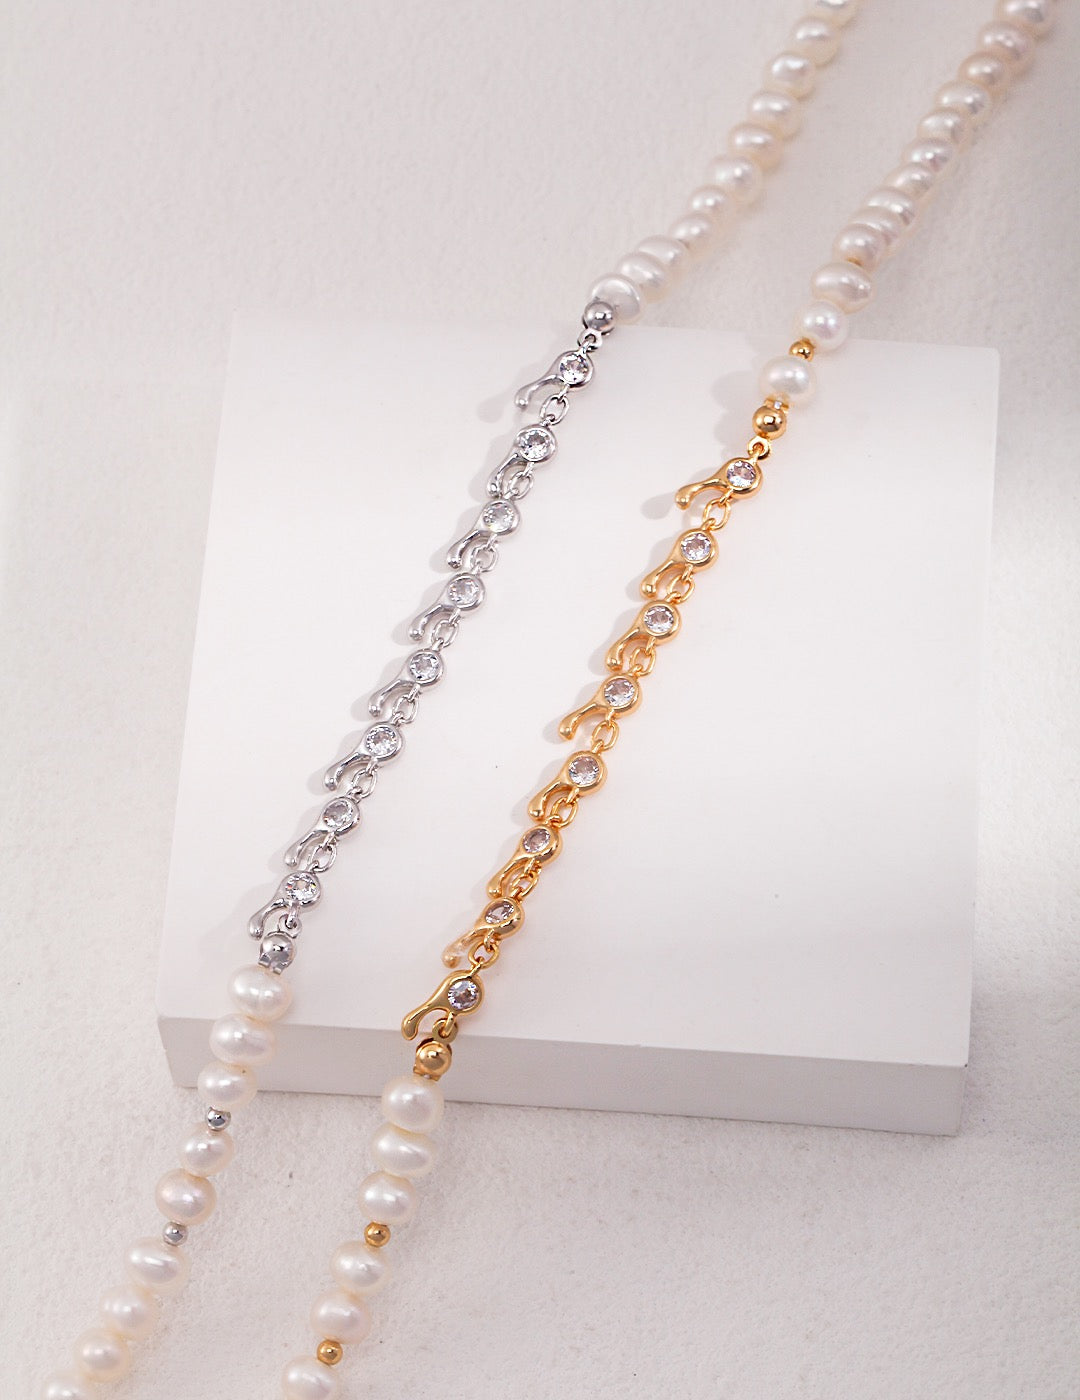 Pearlescent Opulence Shimmer Necklace, a true embodiment of elegance - Delight in its iridescent glow, oozing sophistication - Elevate your style and radiate charm effortlessly -  S925 Sterling Silver with 18K Gold Vermeil - Pearl Luminance  - The epitome of elegance and luxury